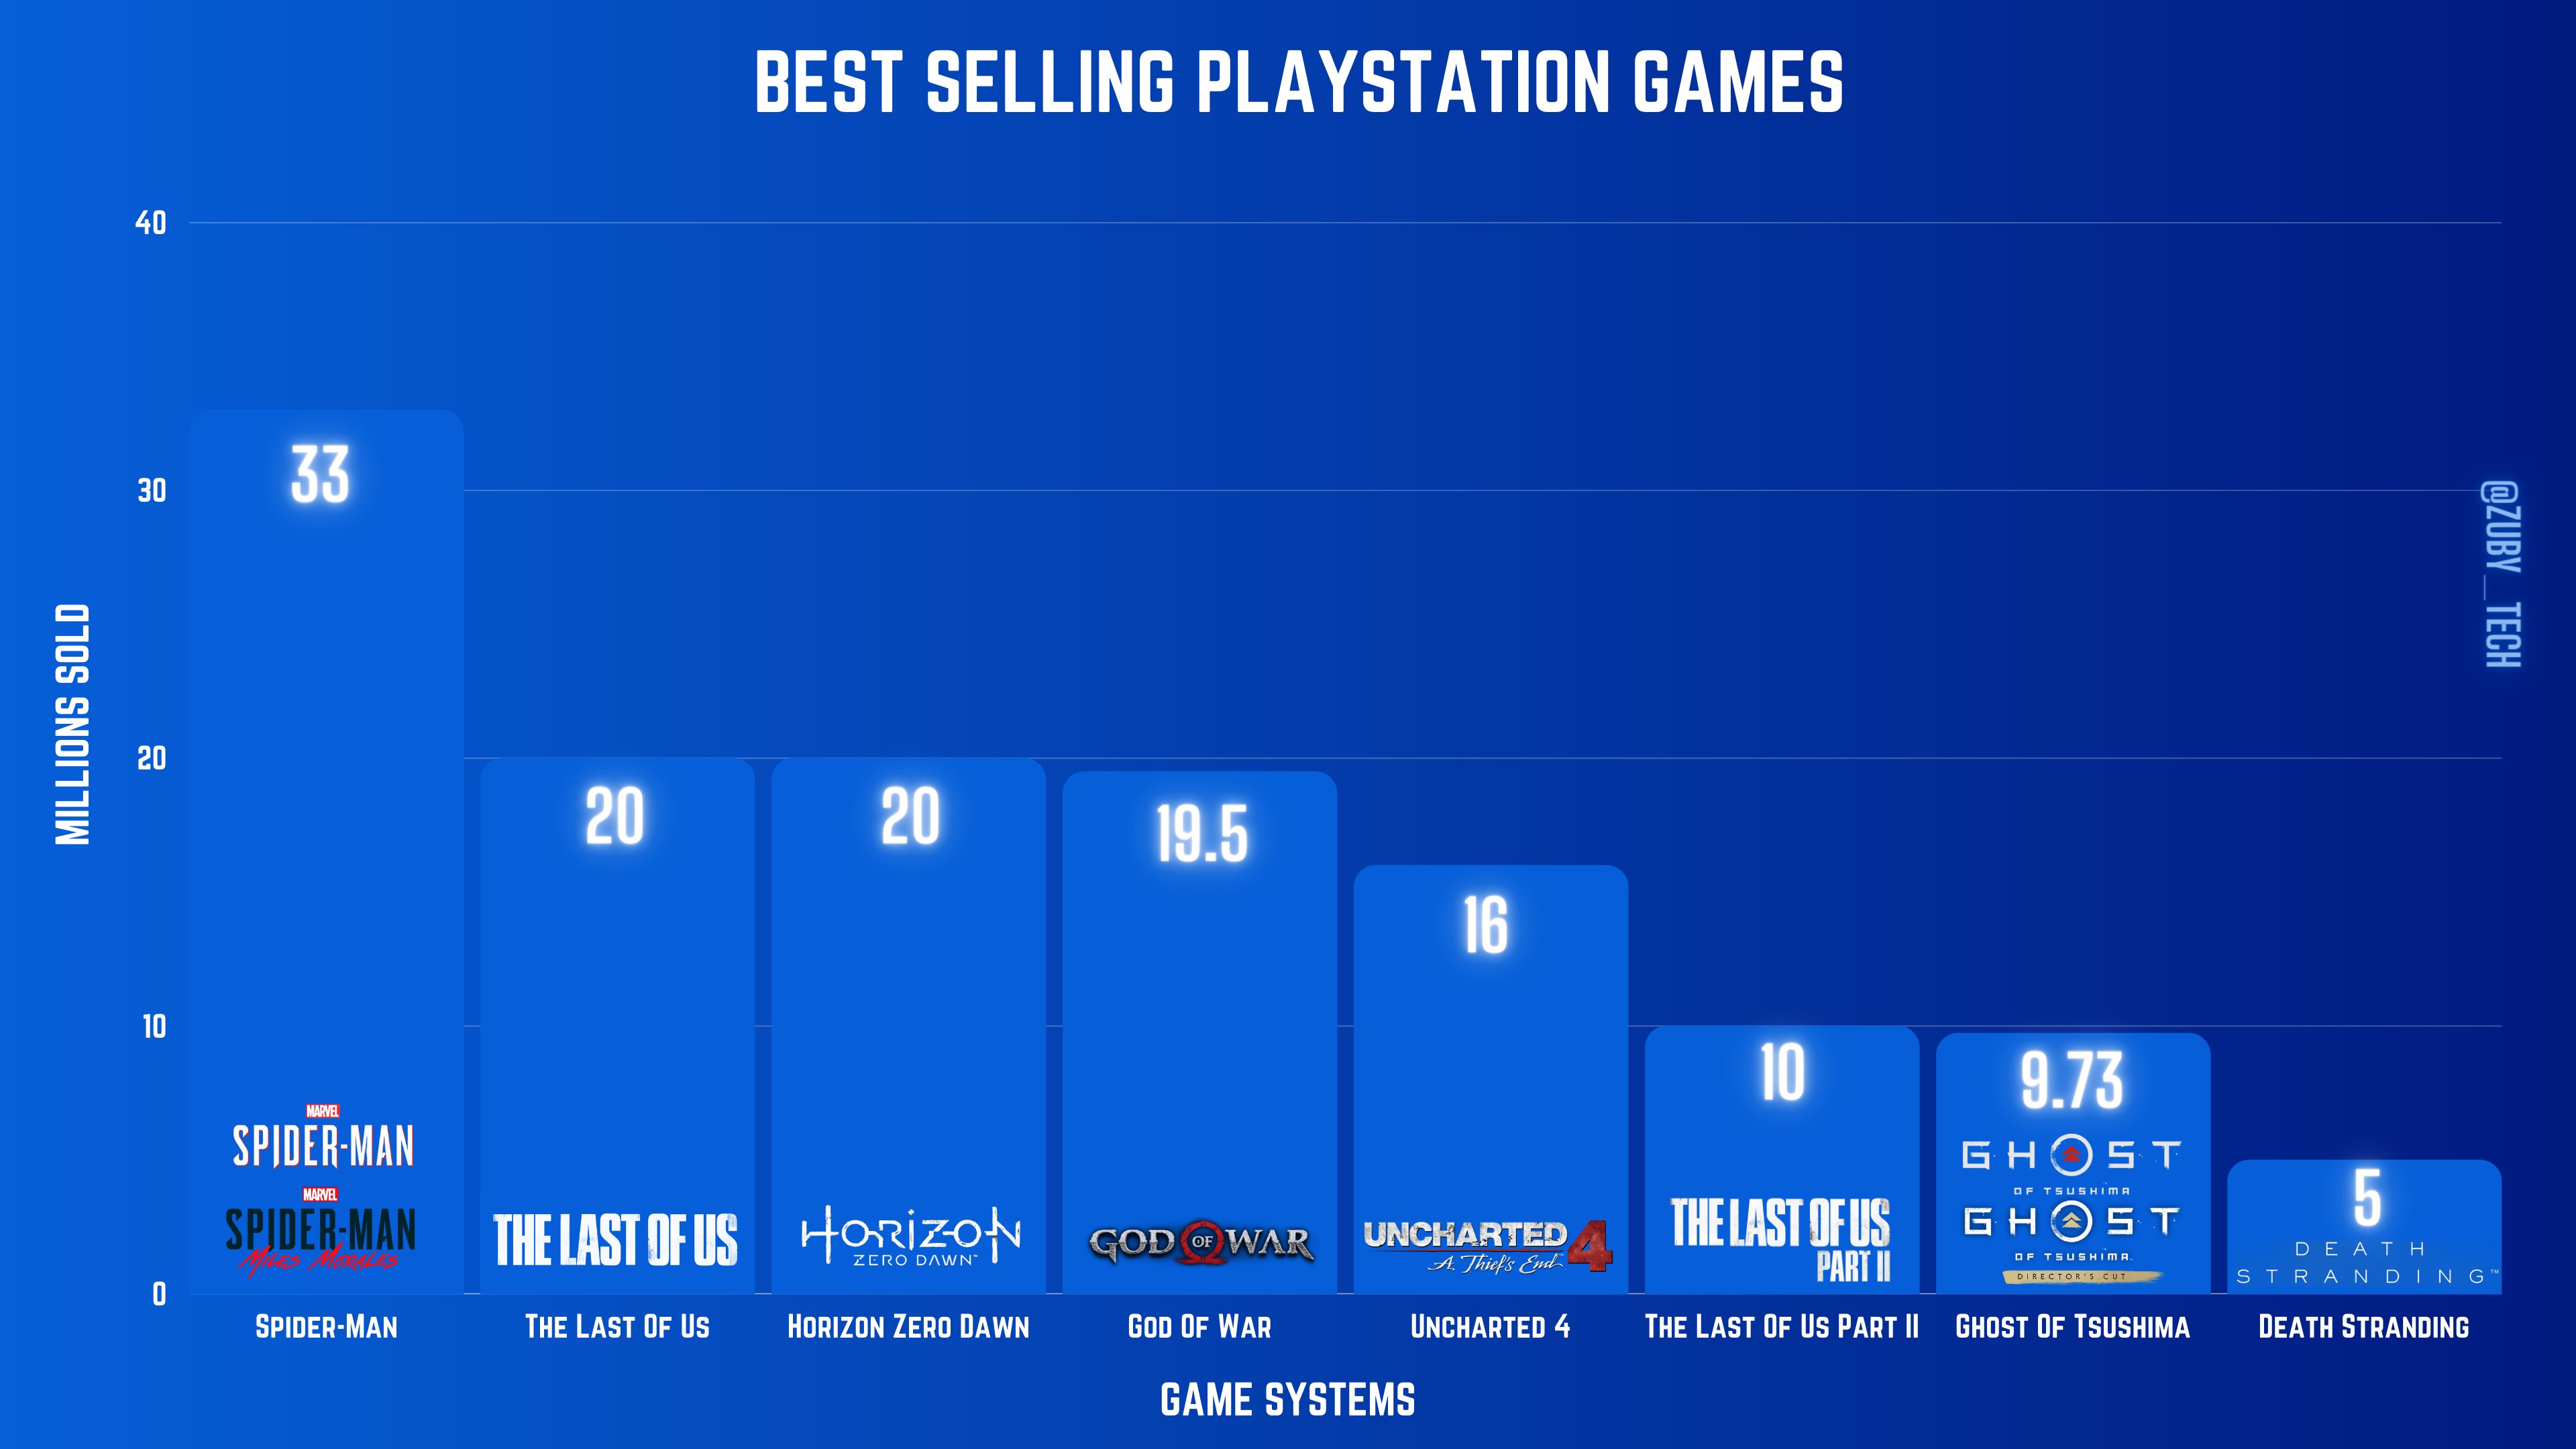 Integration er mere end Sow Zuby_Tech on Twitter: "Best Selling PlayStation Game IP: #PS5 #PlayStation5  #PlayStation #PlayHasNoLimits #DualSense https://t.co/WuJ9lwUvb6" / Twitter